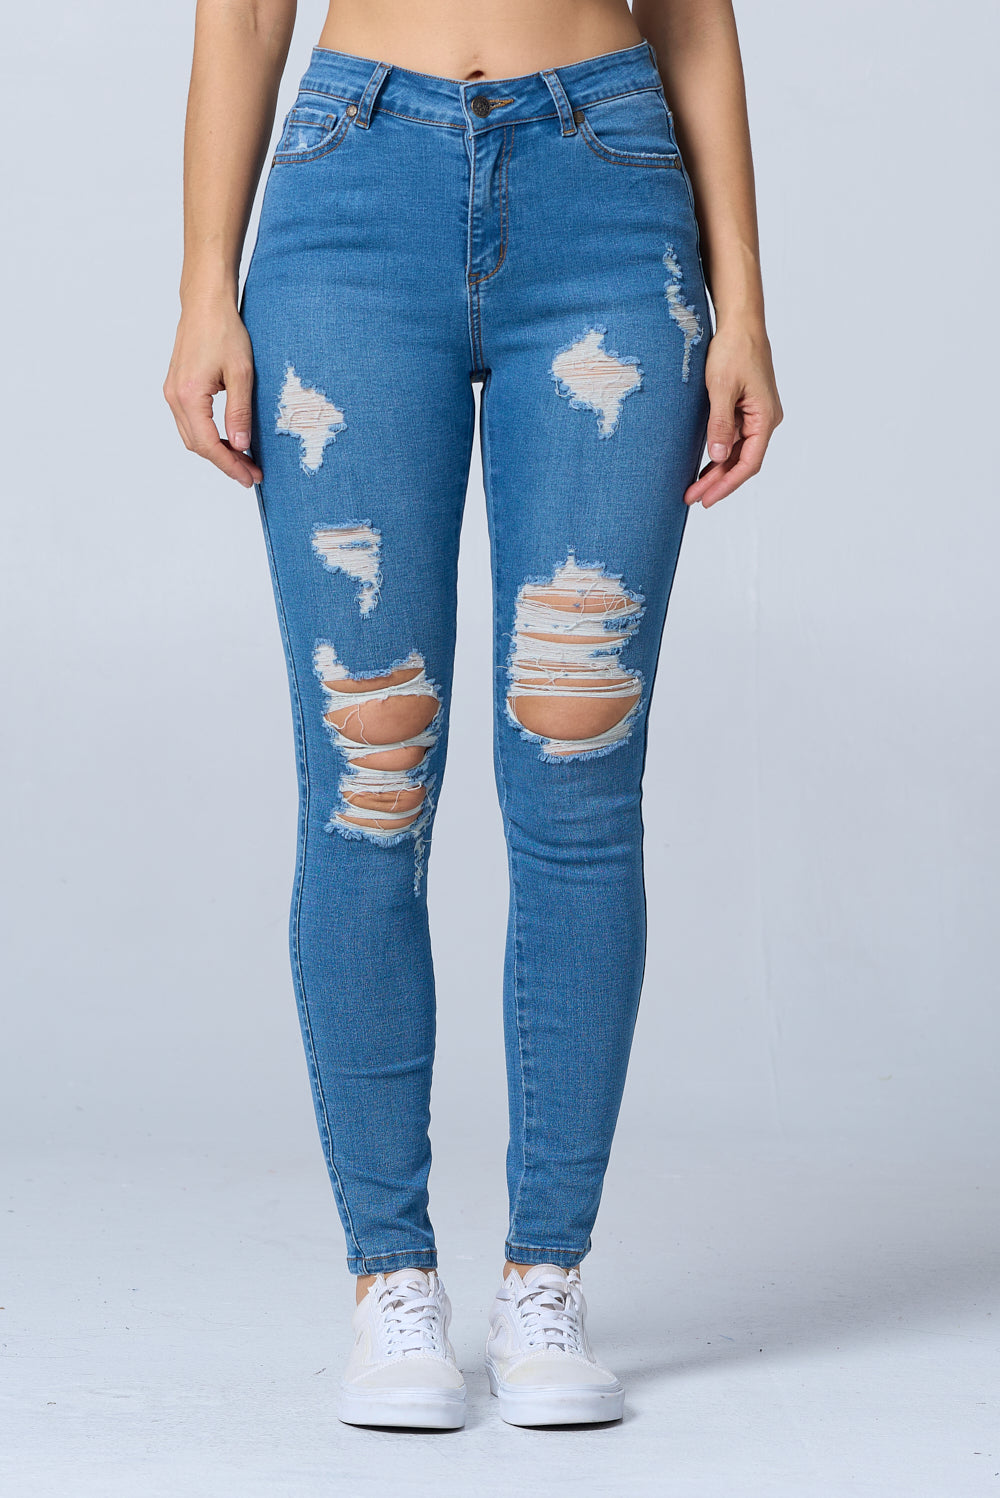 Wholesale Distressed High Waisted Skinny Jeans @ Blue Turtle Jeans – BLUE